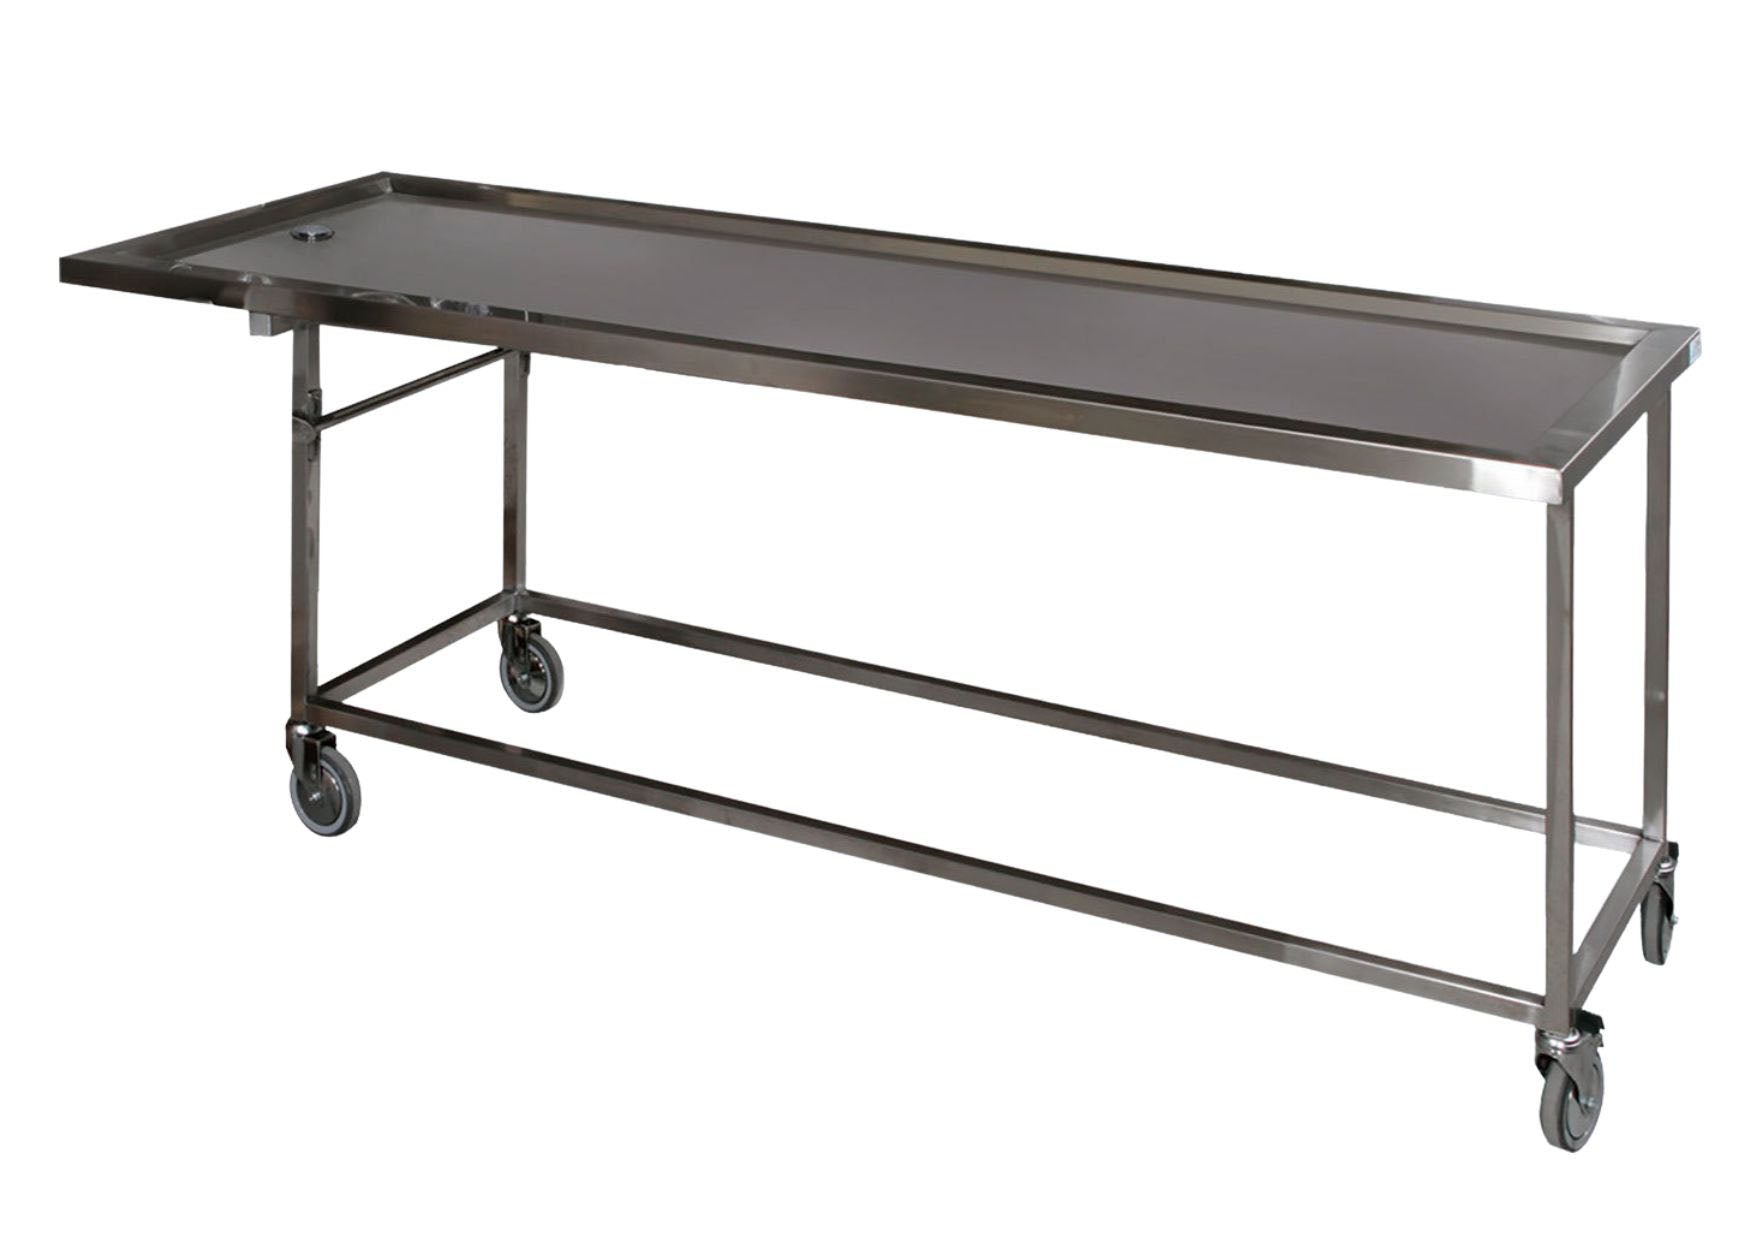 Stainless steel mobile dissection table with slope